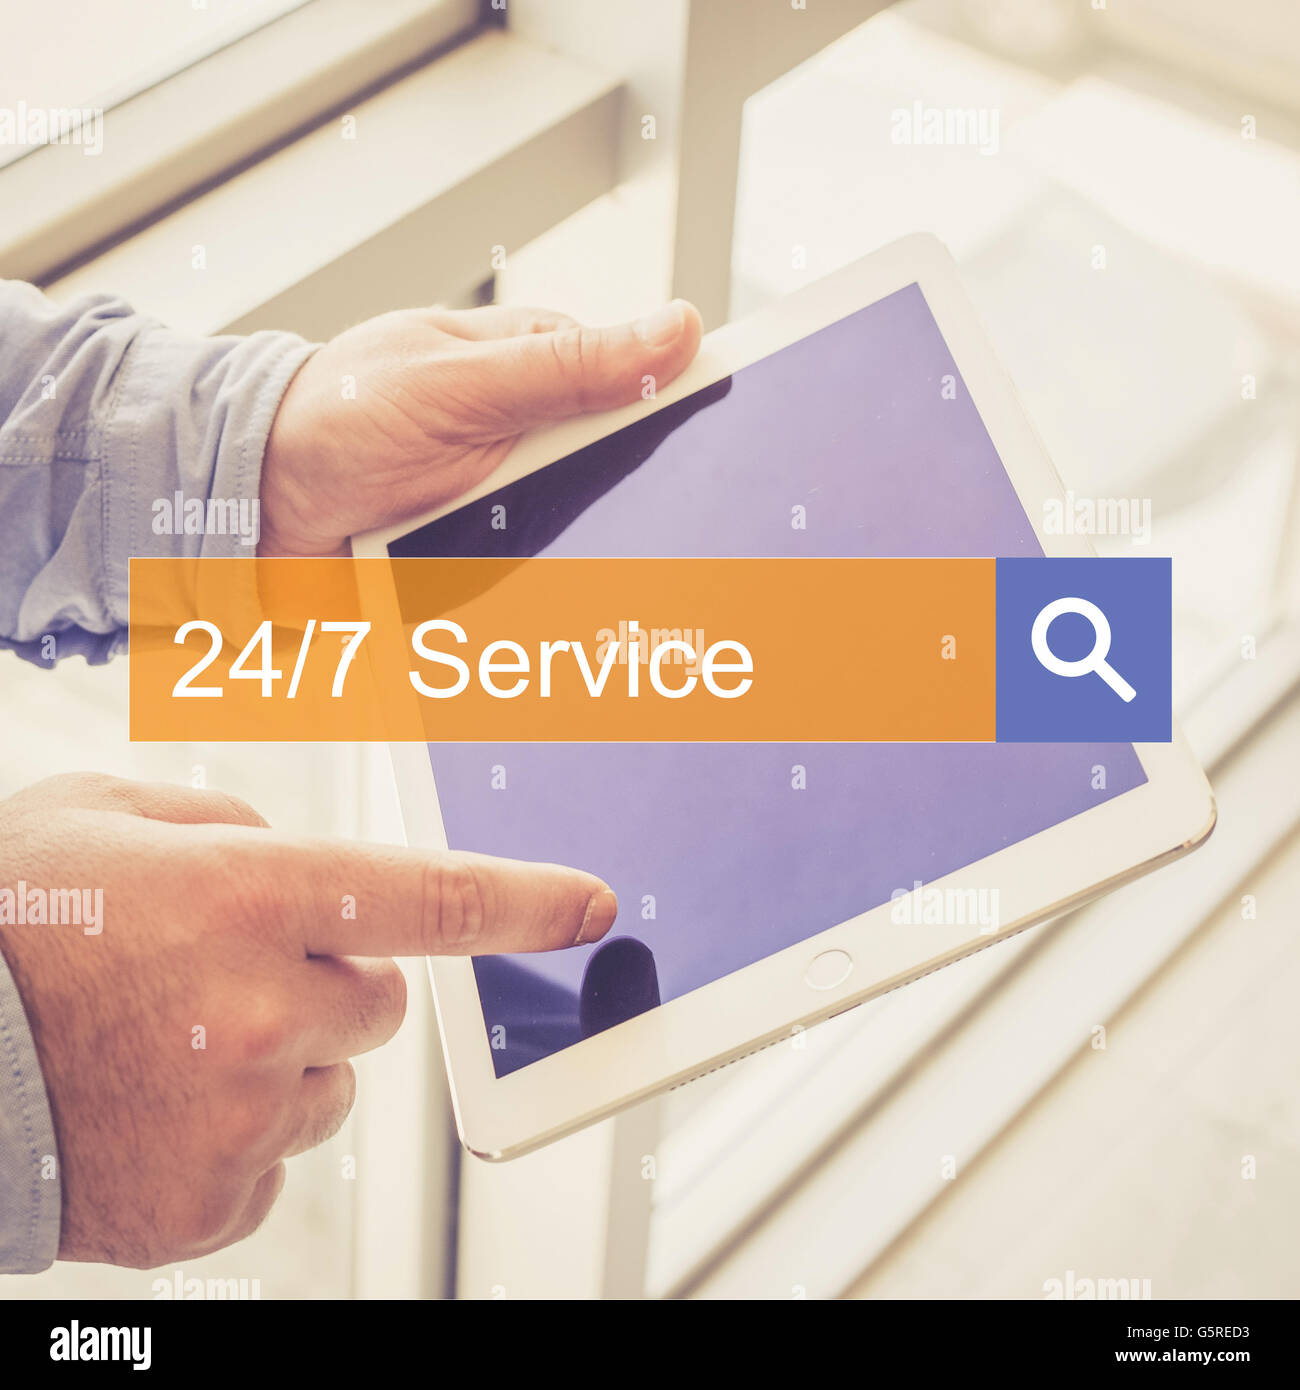 SEARCH TECHNOLOGY COMMUNICATION  24/7 Service TABLET FINDING CONCEPT Stock Photo